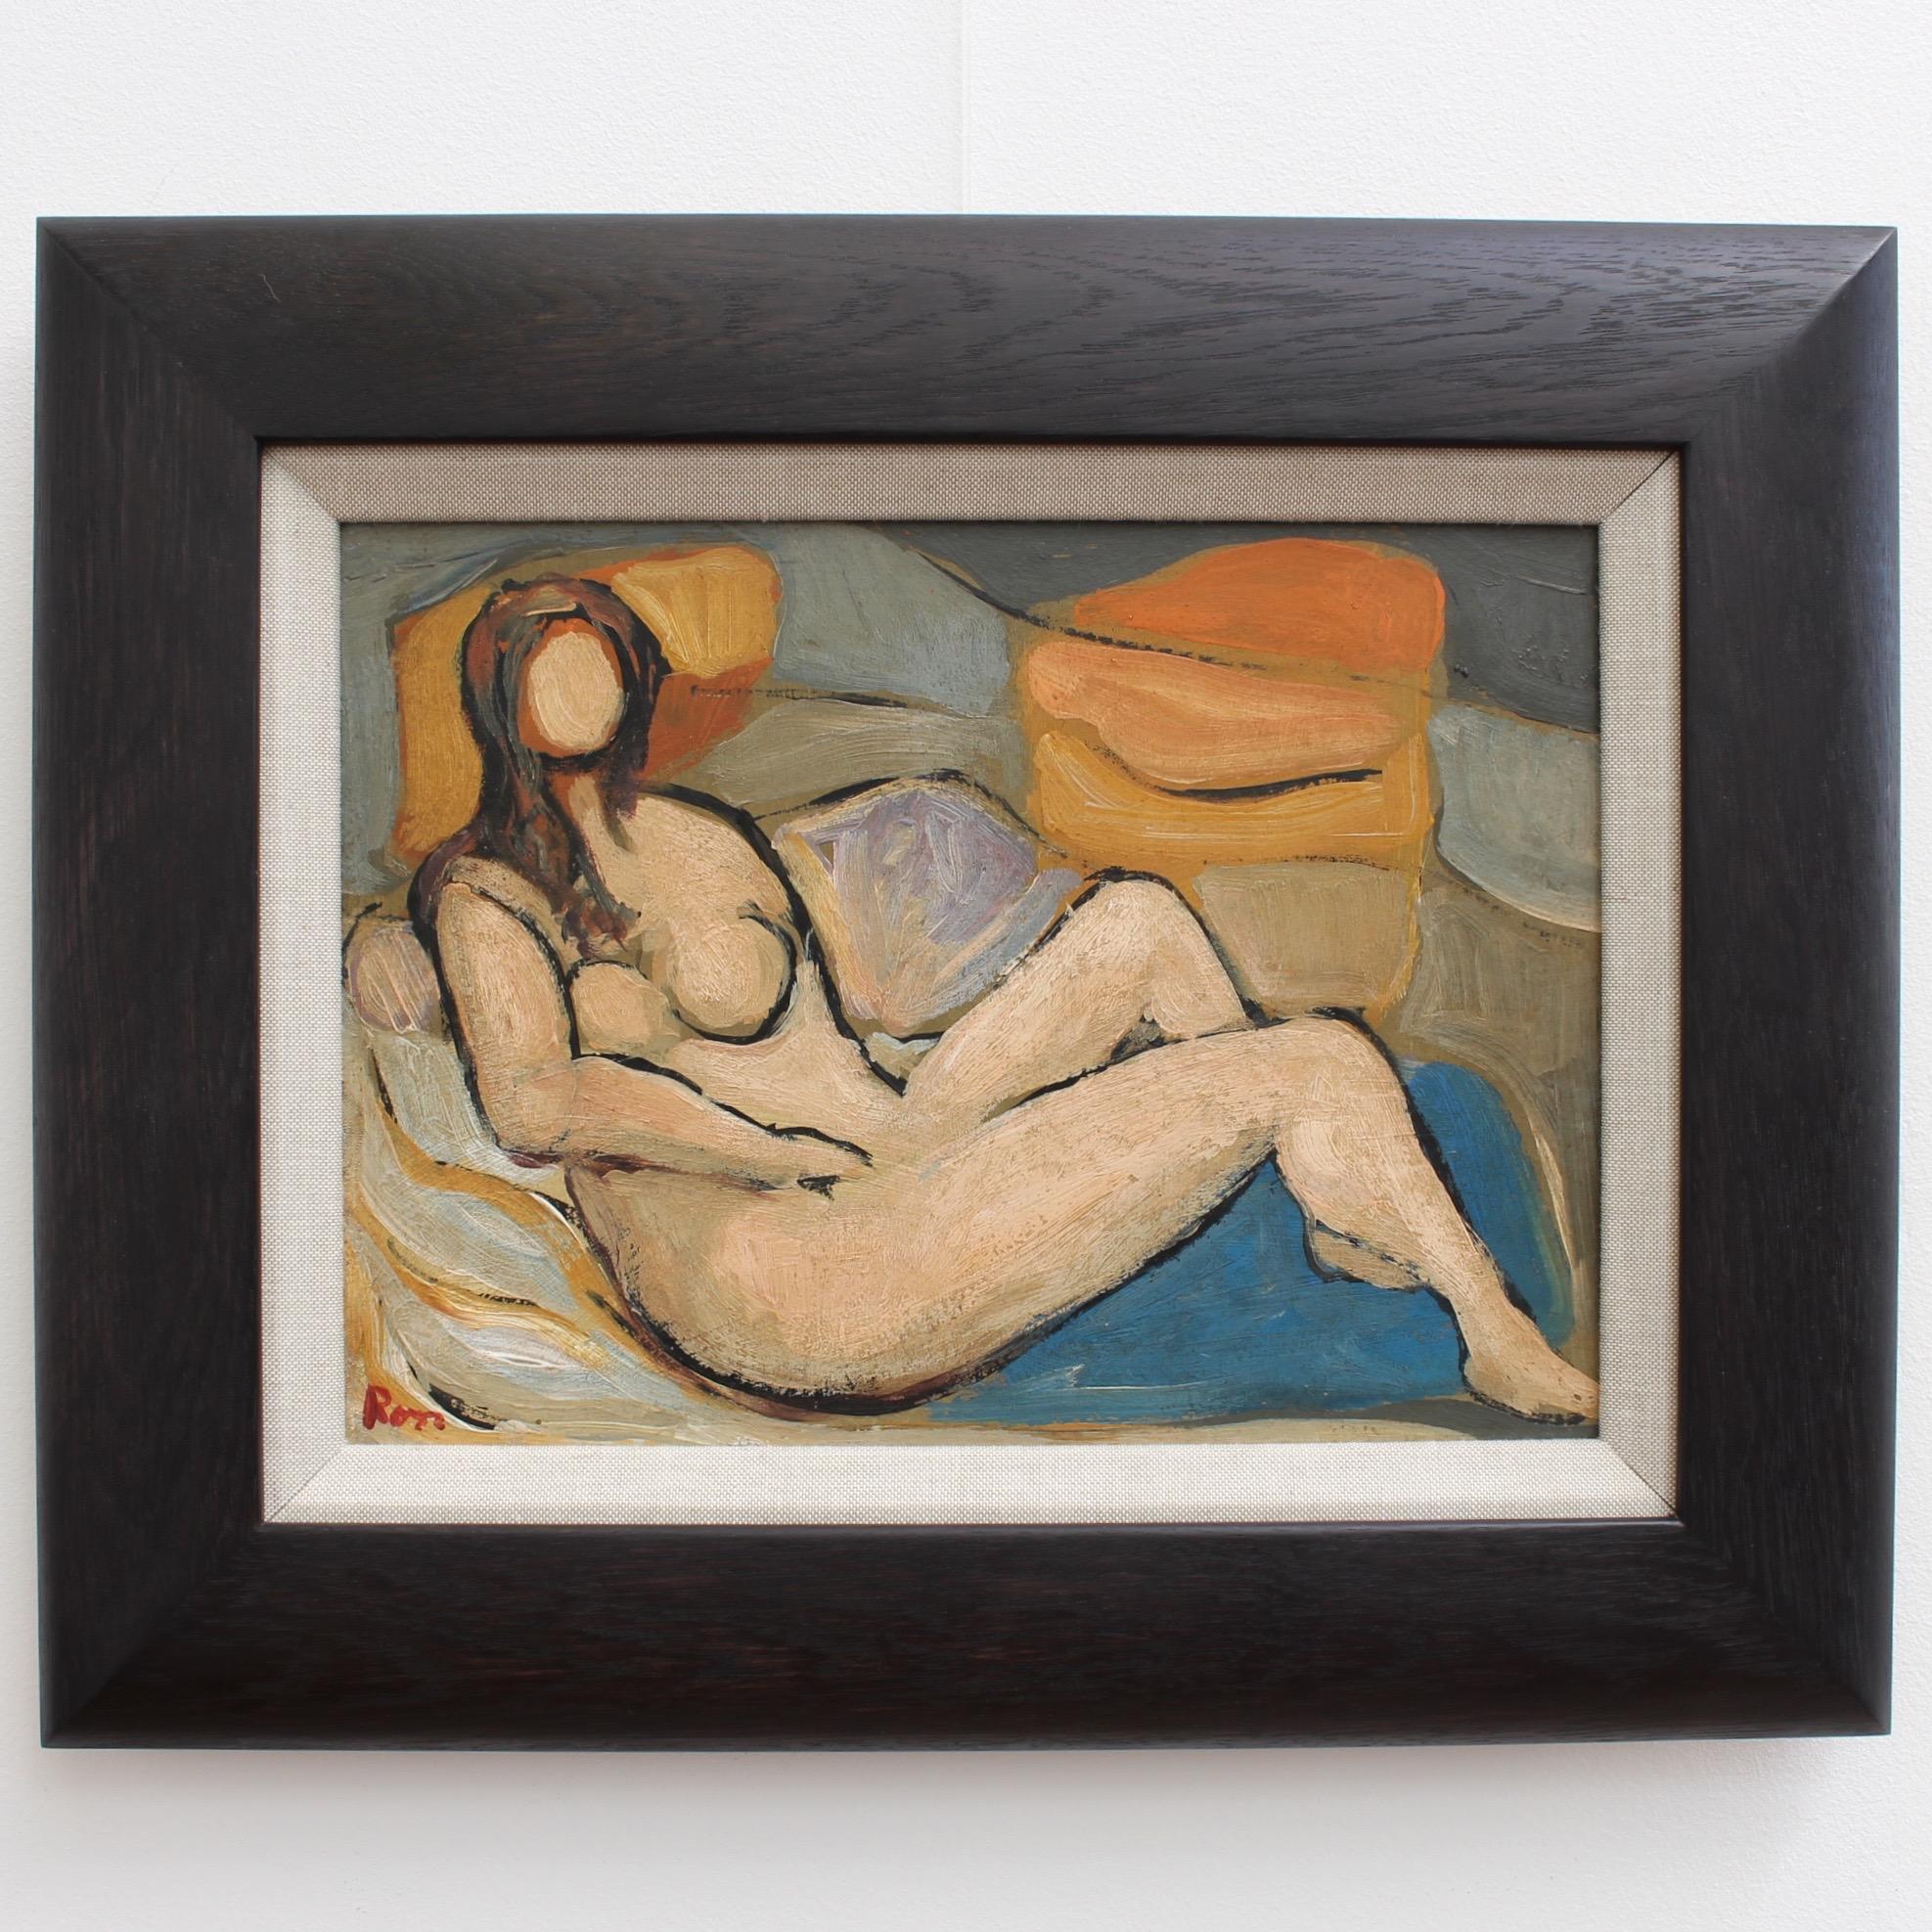 'Reclining Nude in Colour' by R.M. - Painting by Unknown